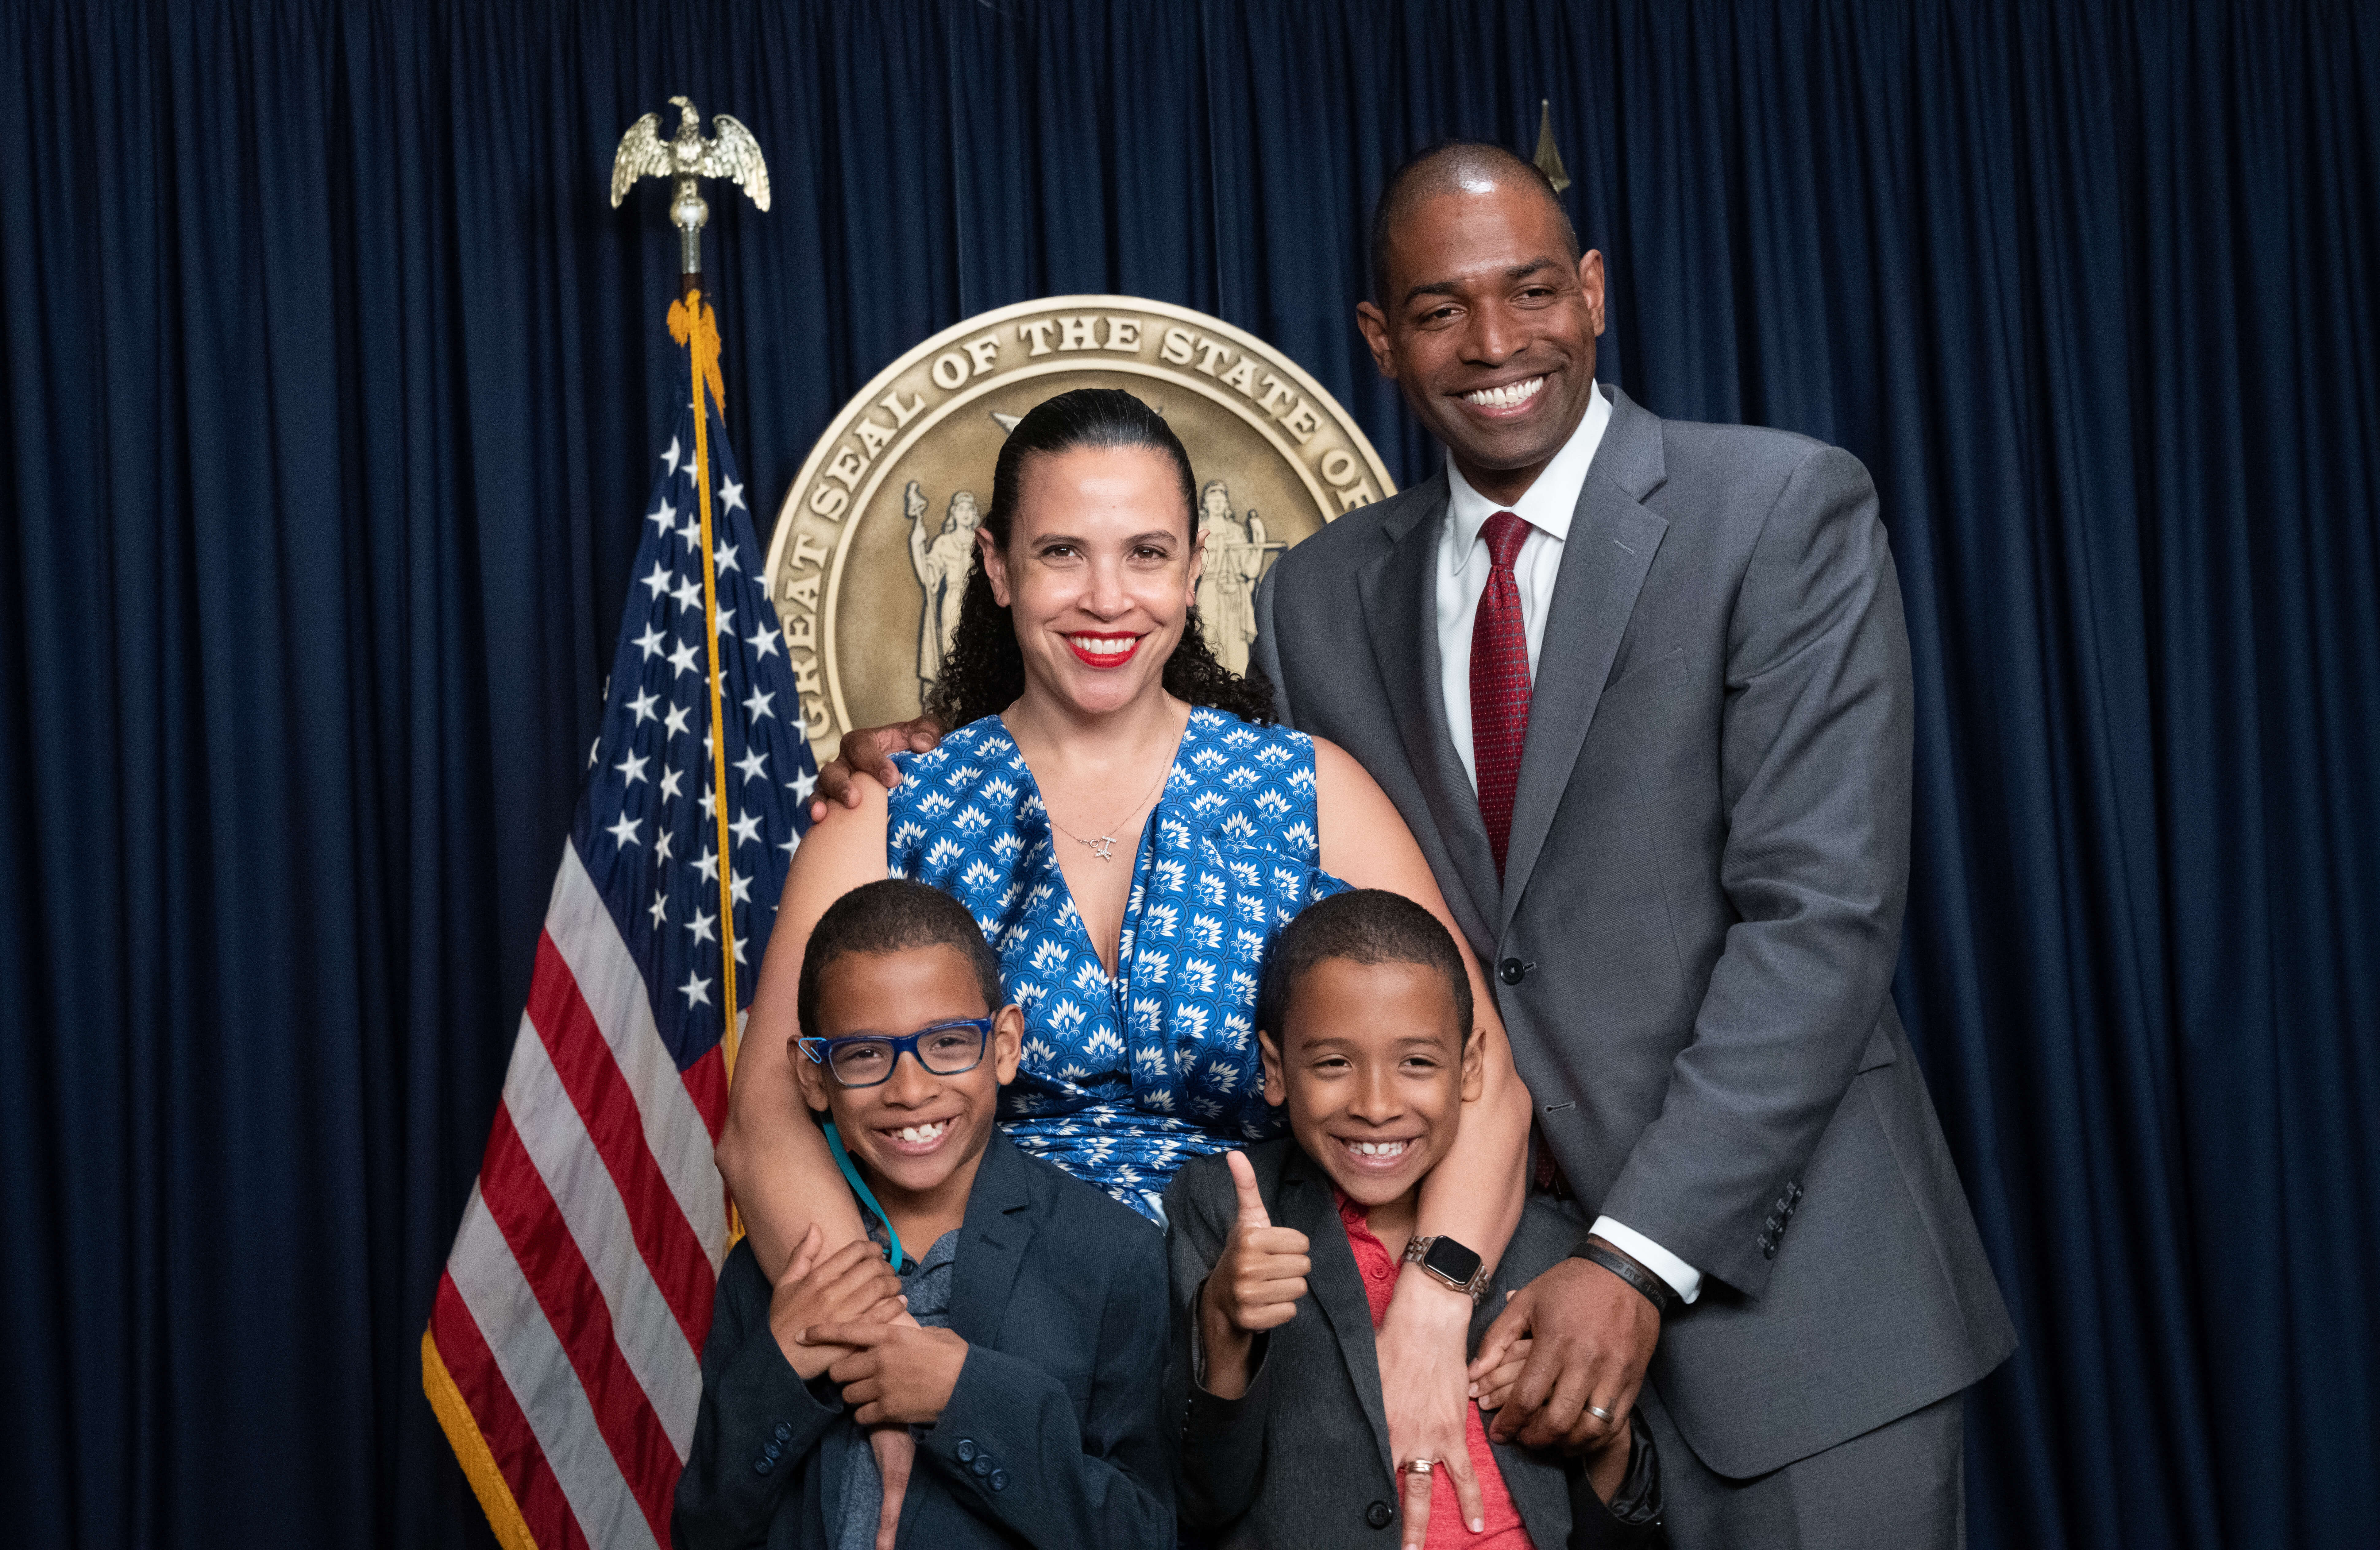 Lt. Governor Antonio Delgado with his wife Lacey Schwartz Delgado and his twin sons Maxwell and Coltrane at his swearing in ceremony on May 25, 2022.